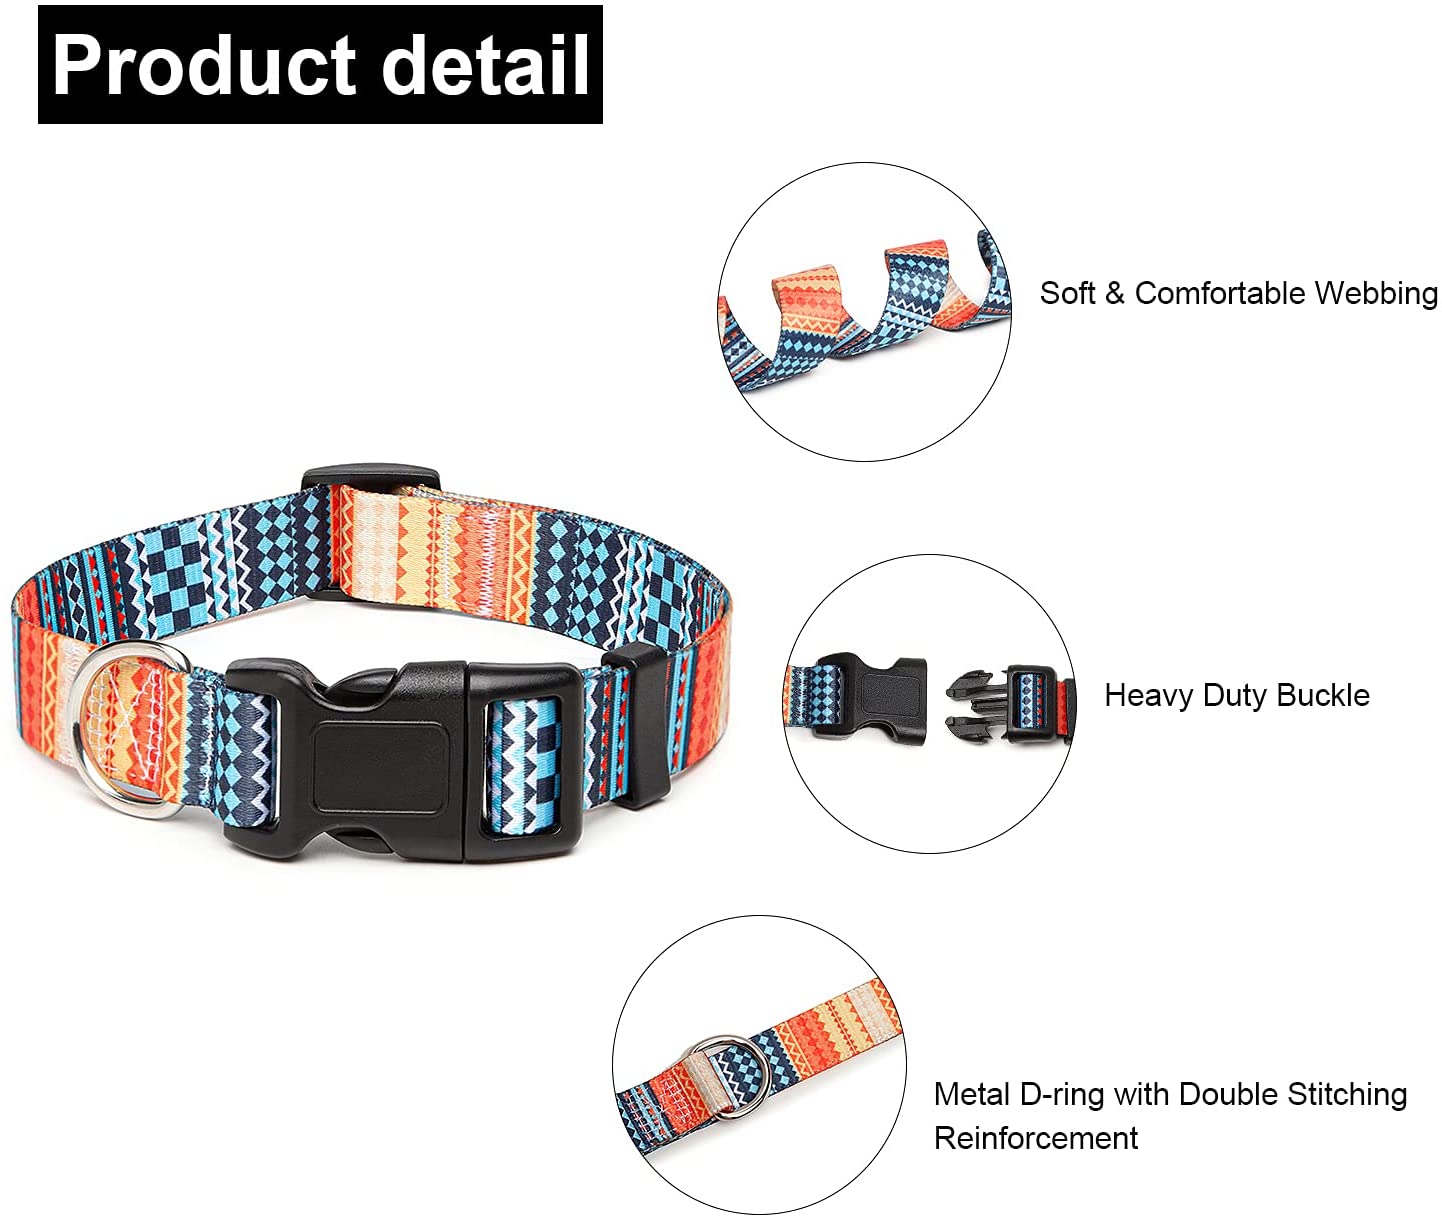 Qpets  Bohemia Style Dog Collar with Patterns Adjustable 33-55cm Soft Comfy Pet Collars Dog Belt for Small Medium Large 15-30KG Dogs (Size:M)